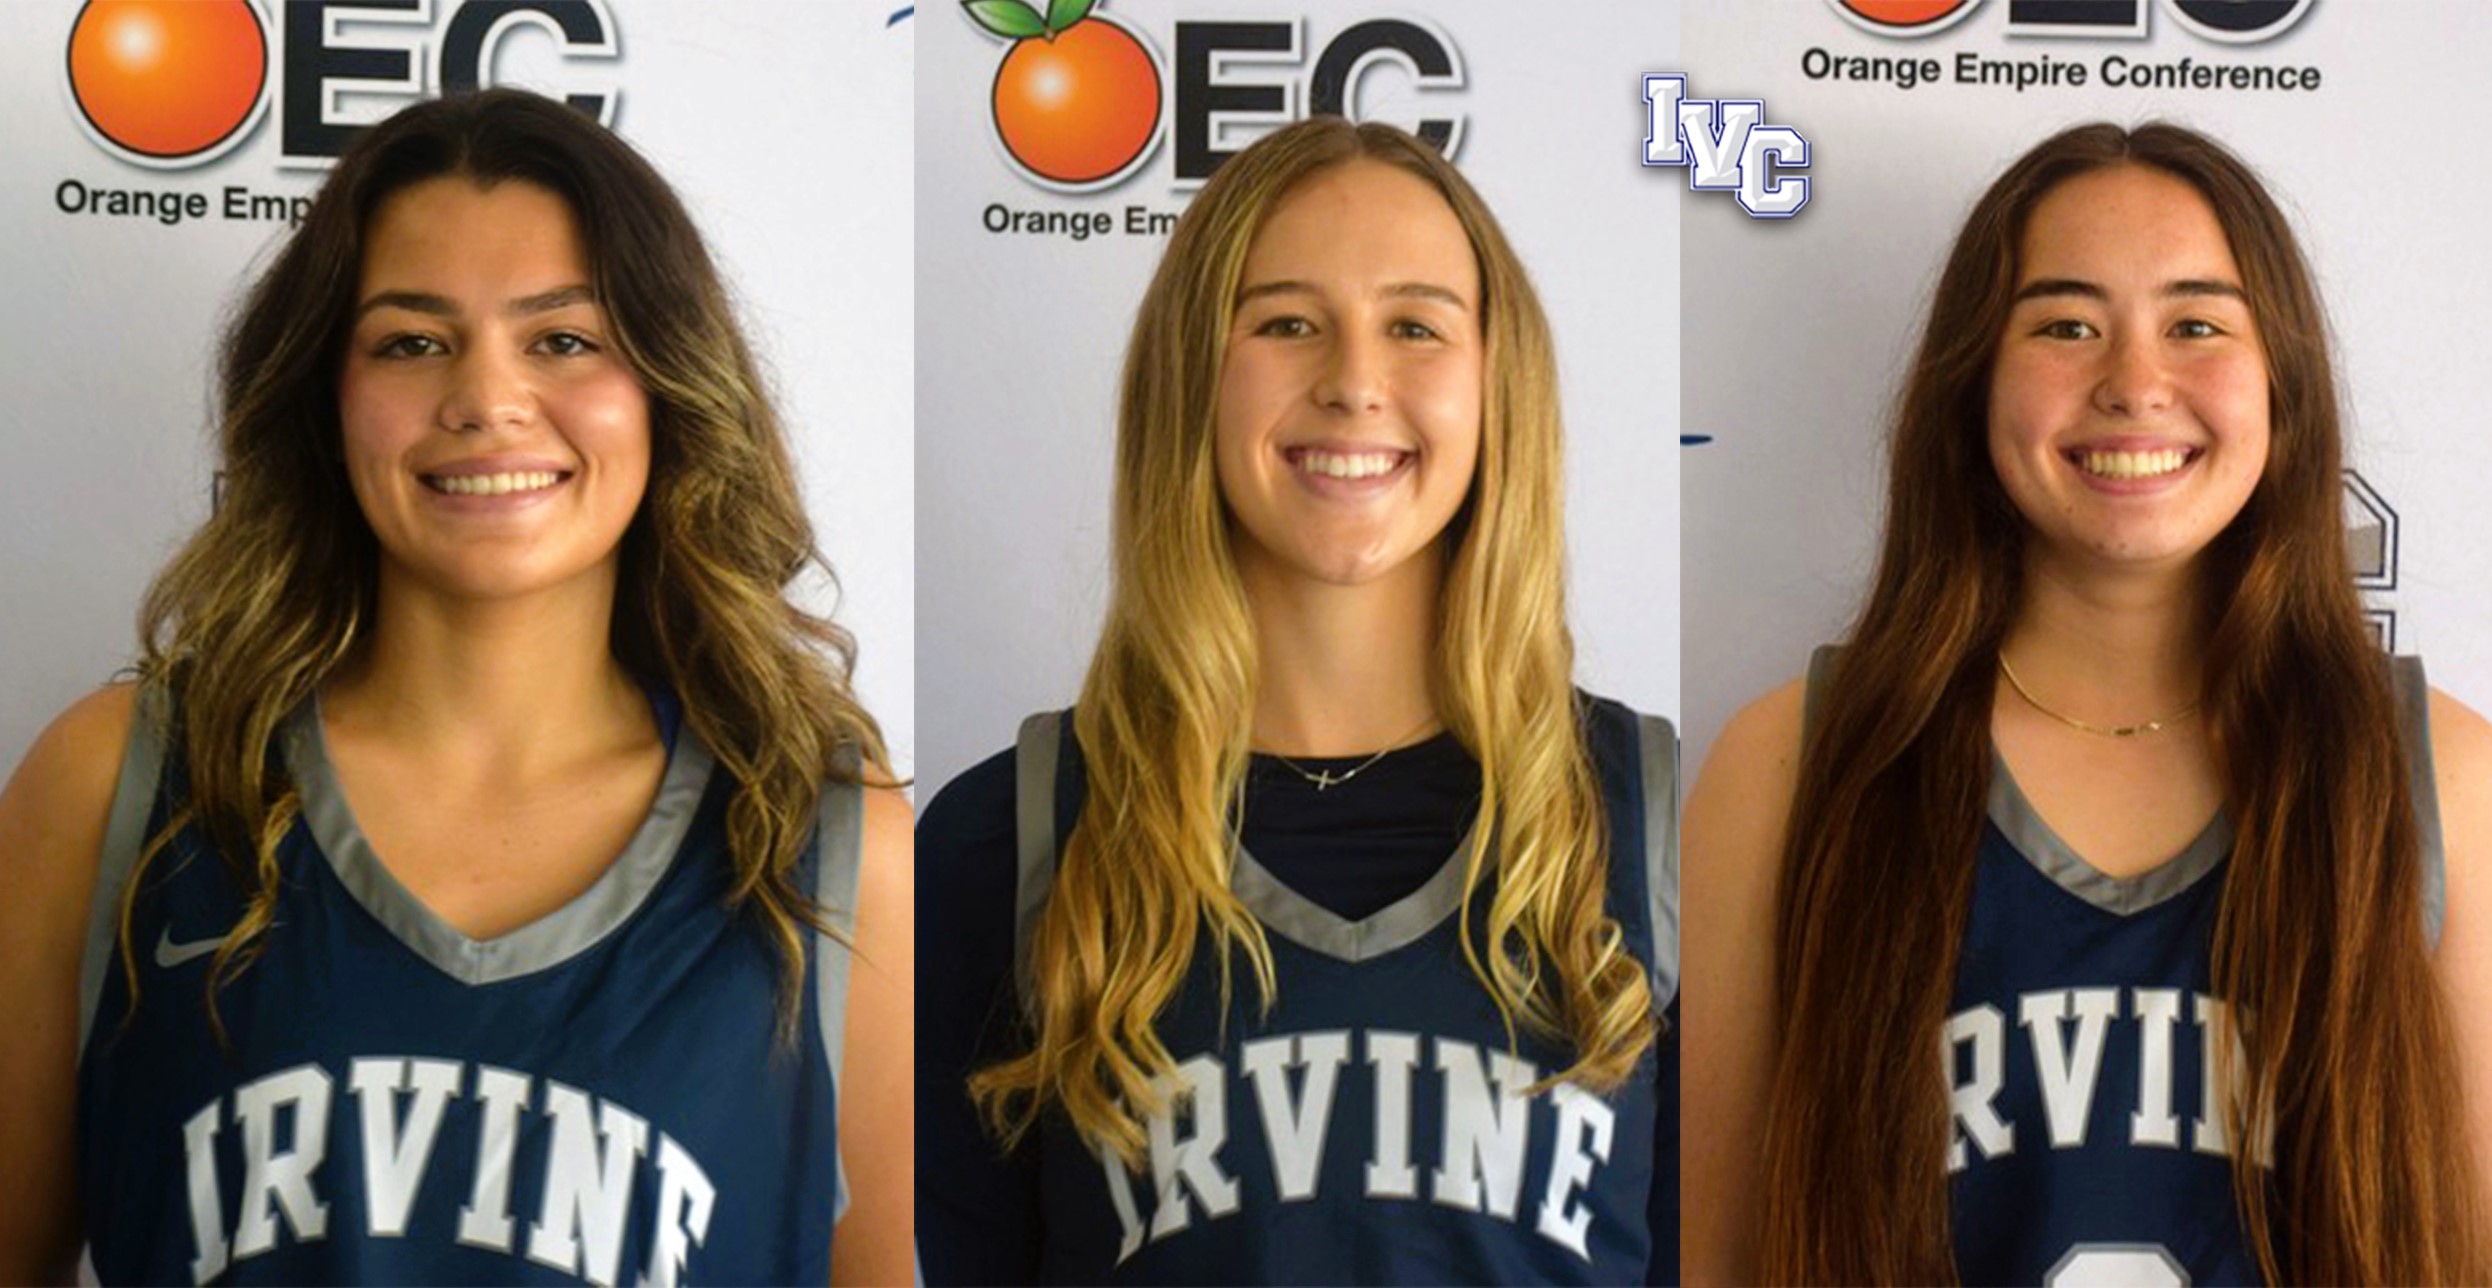 Alexander, Pucci, Freeman named all-Orange Empire Conference